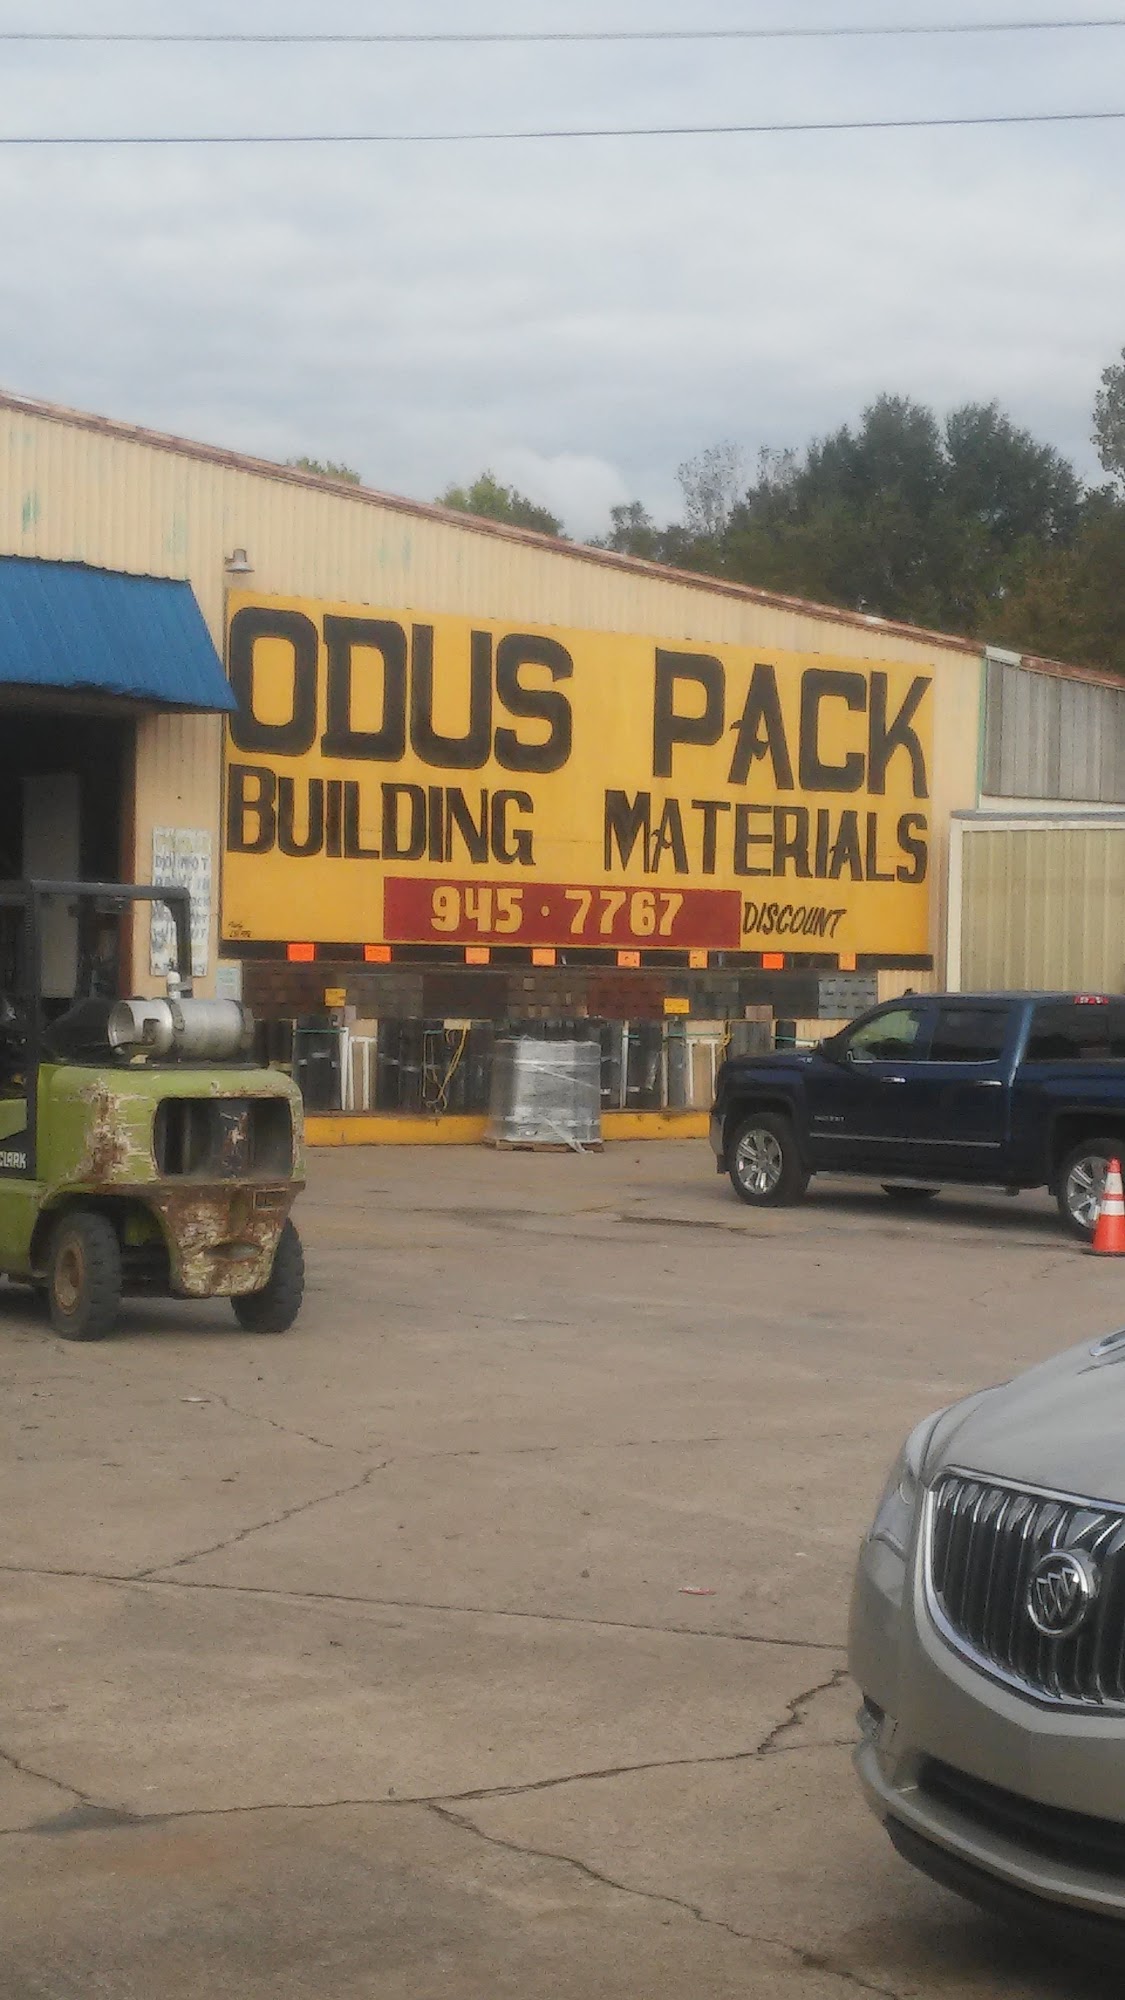 Odus Pack Building Materials